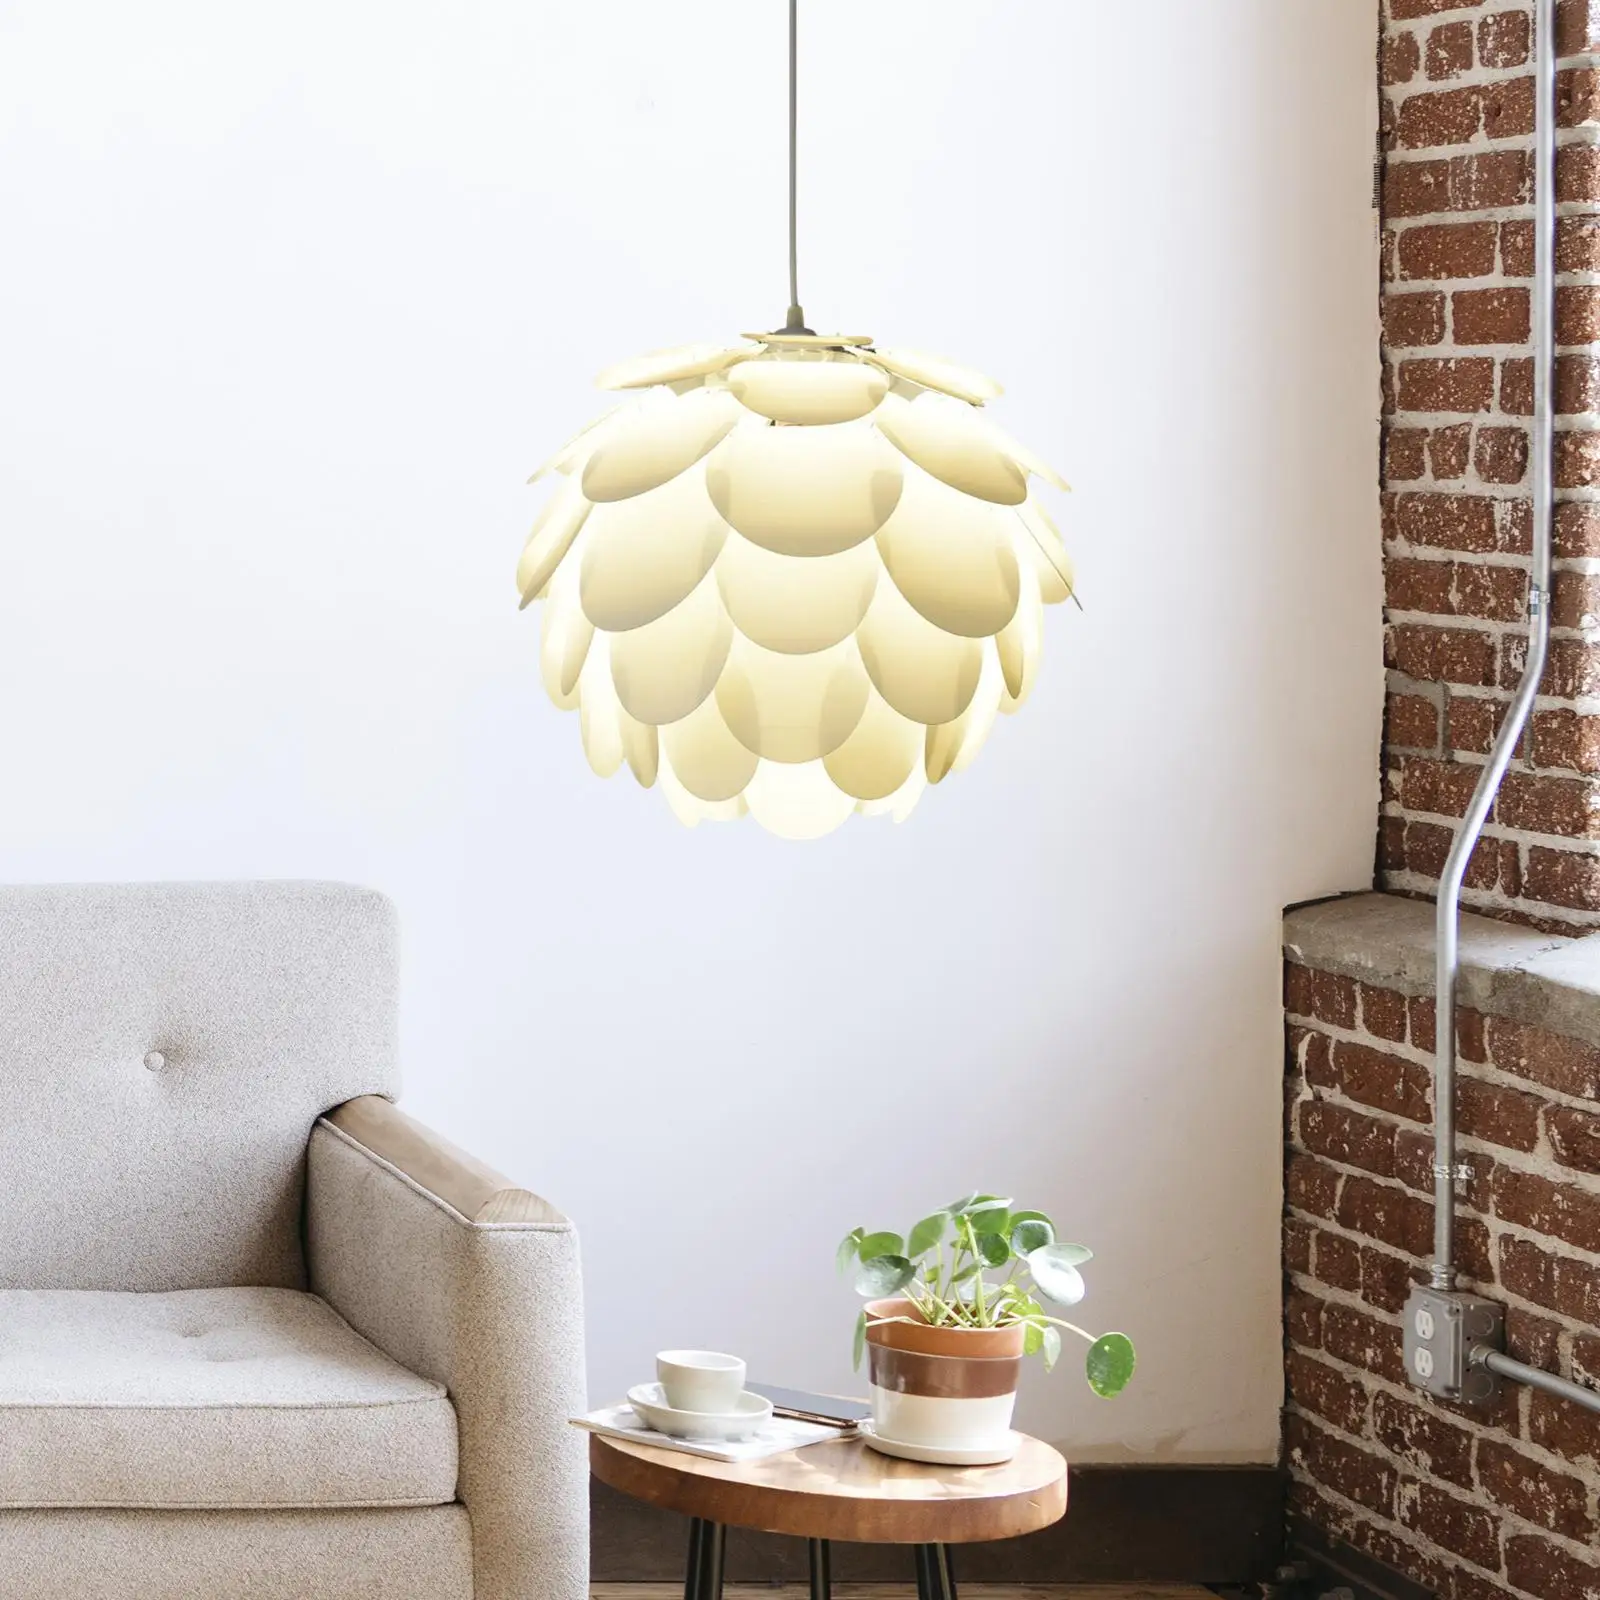 Decorative Lampshade, Lamp Fixture Shade Simple Crafts Replacement Chandelier Shade for Hallway Kitchen Balcony Teahouse